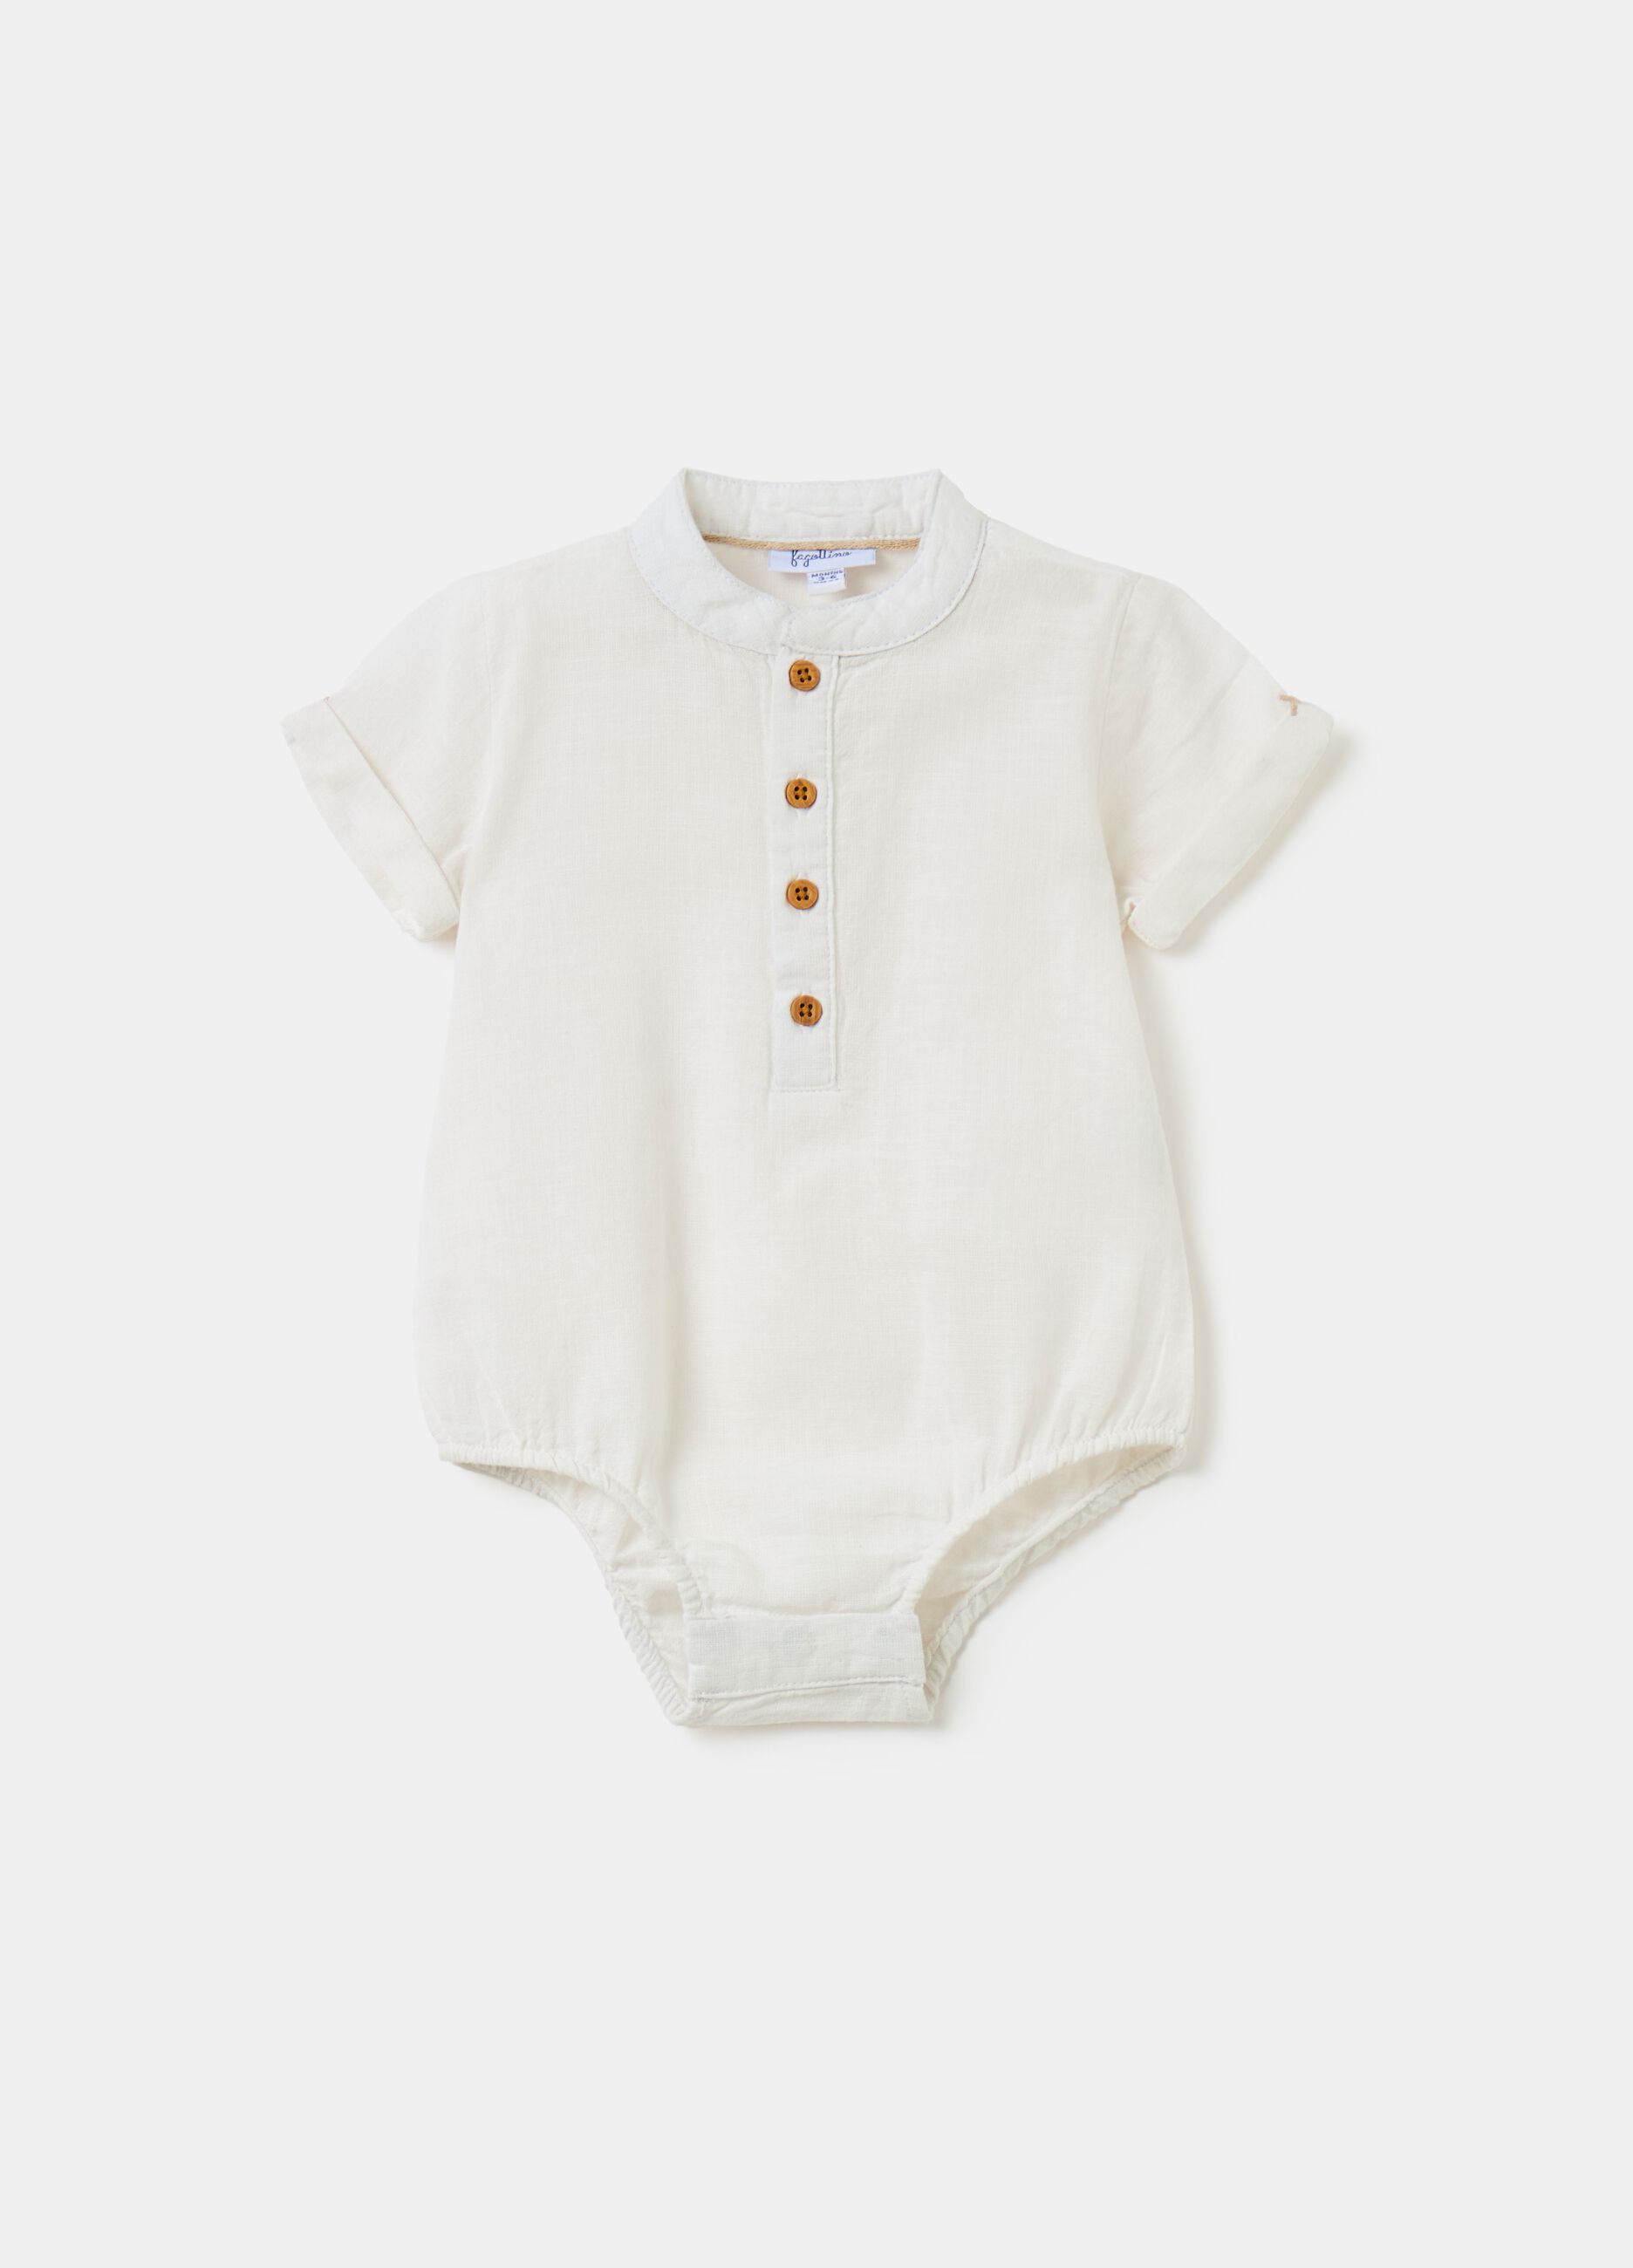 Shirt bodysuit in cotton and linen